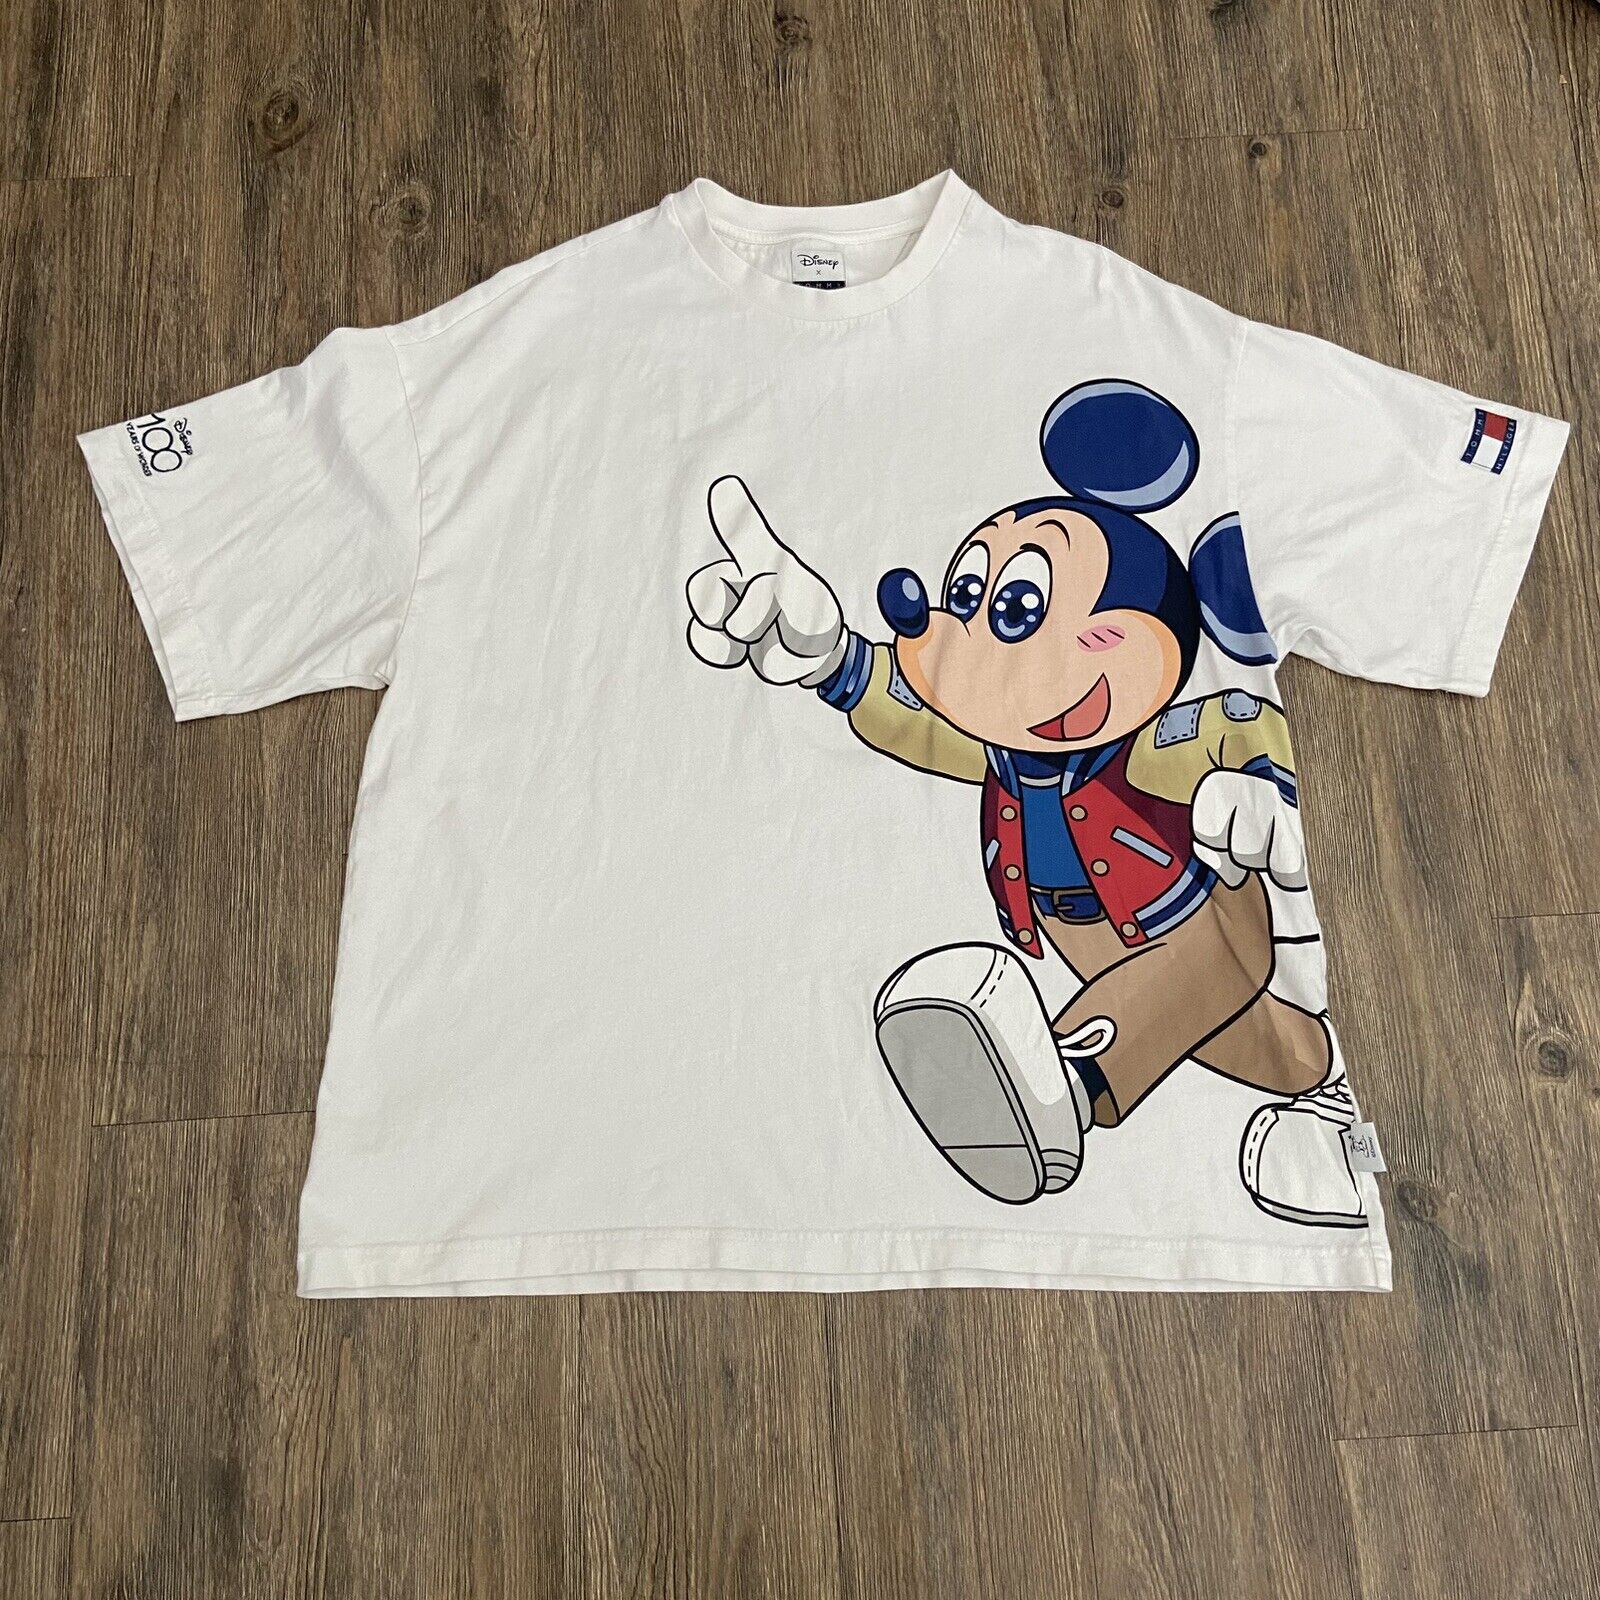 Mickey Mouse X Tommy Hilfiger Disney 100  T-Shirt Tee Shirt Size Large L